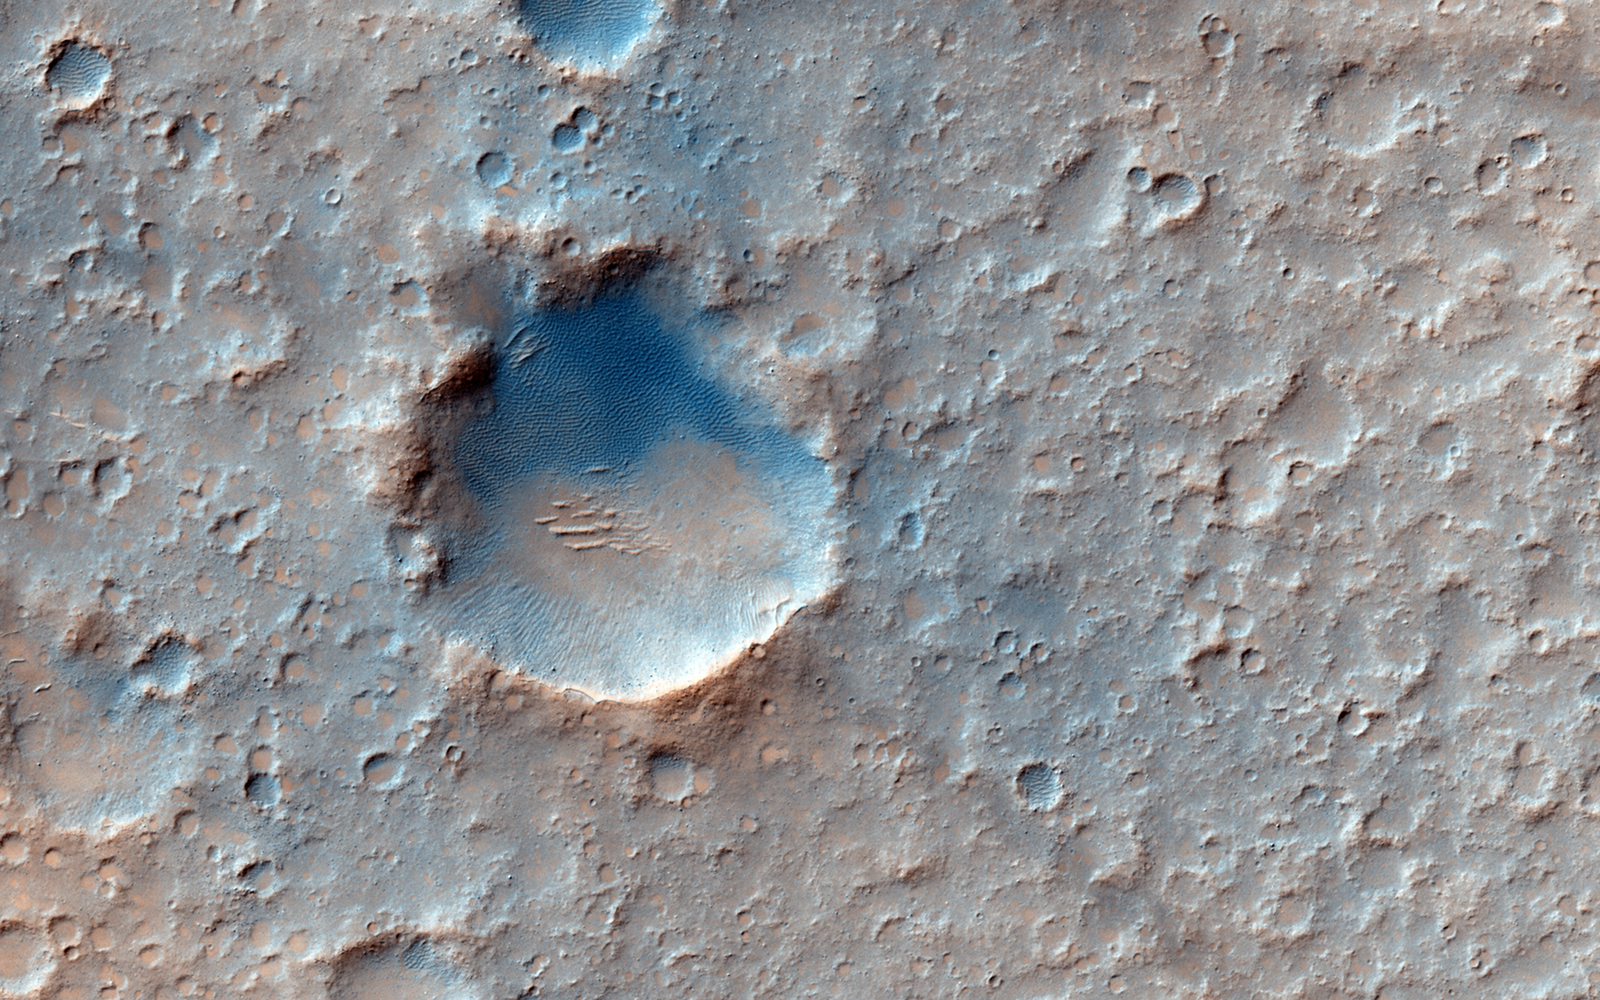 Gusev Crater imaged from orbit by the Mars Reconnaissance Orbiter HiRISE camera.